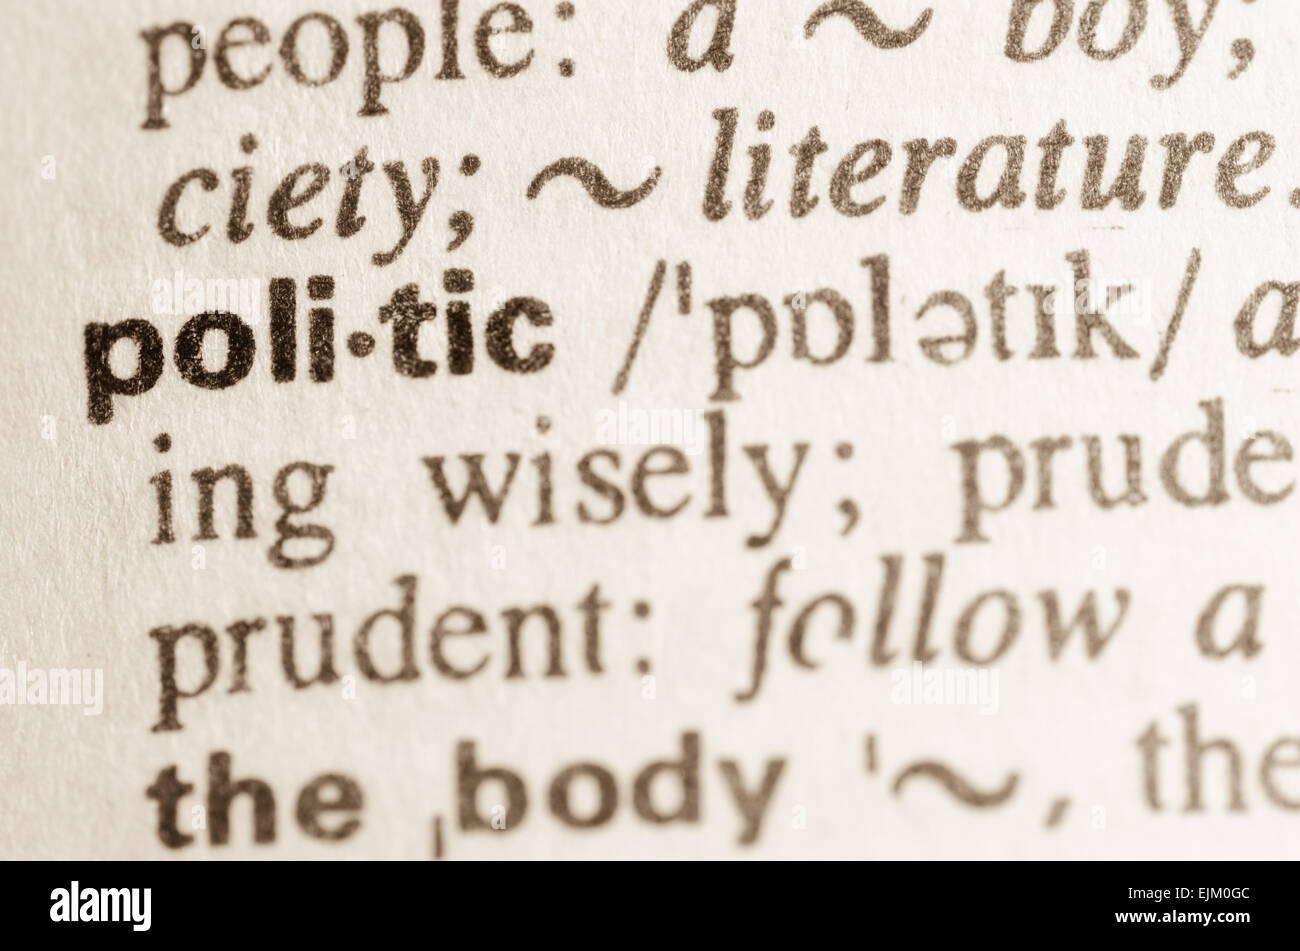 Definition of word politic in dictionary Stock Photo